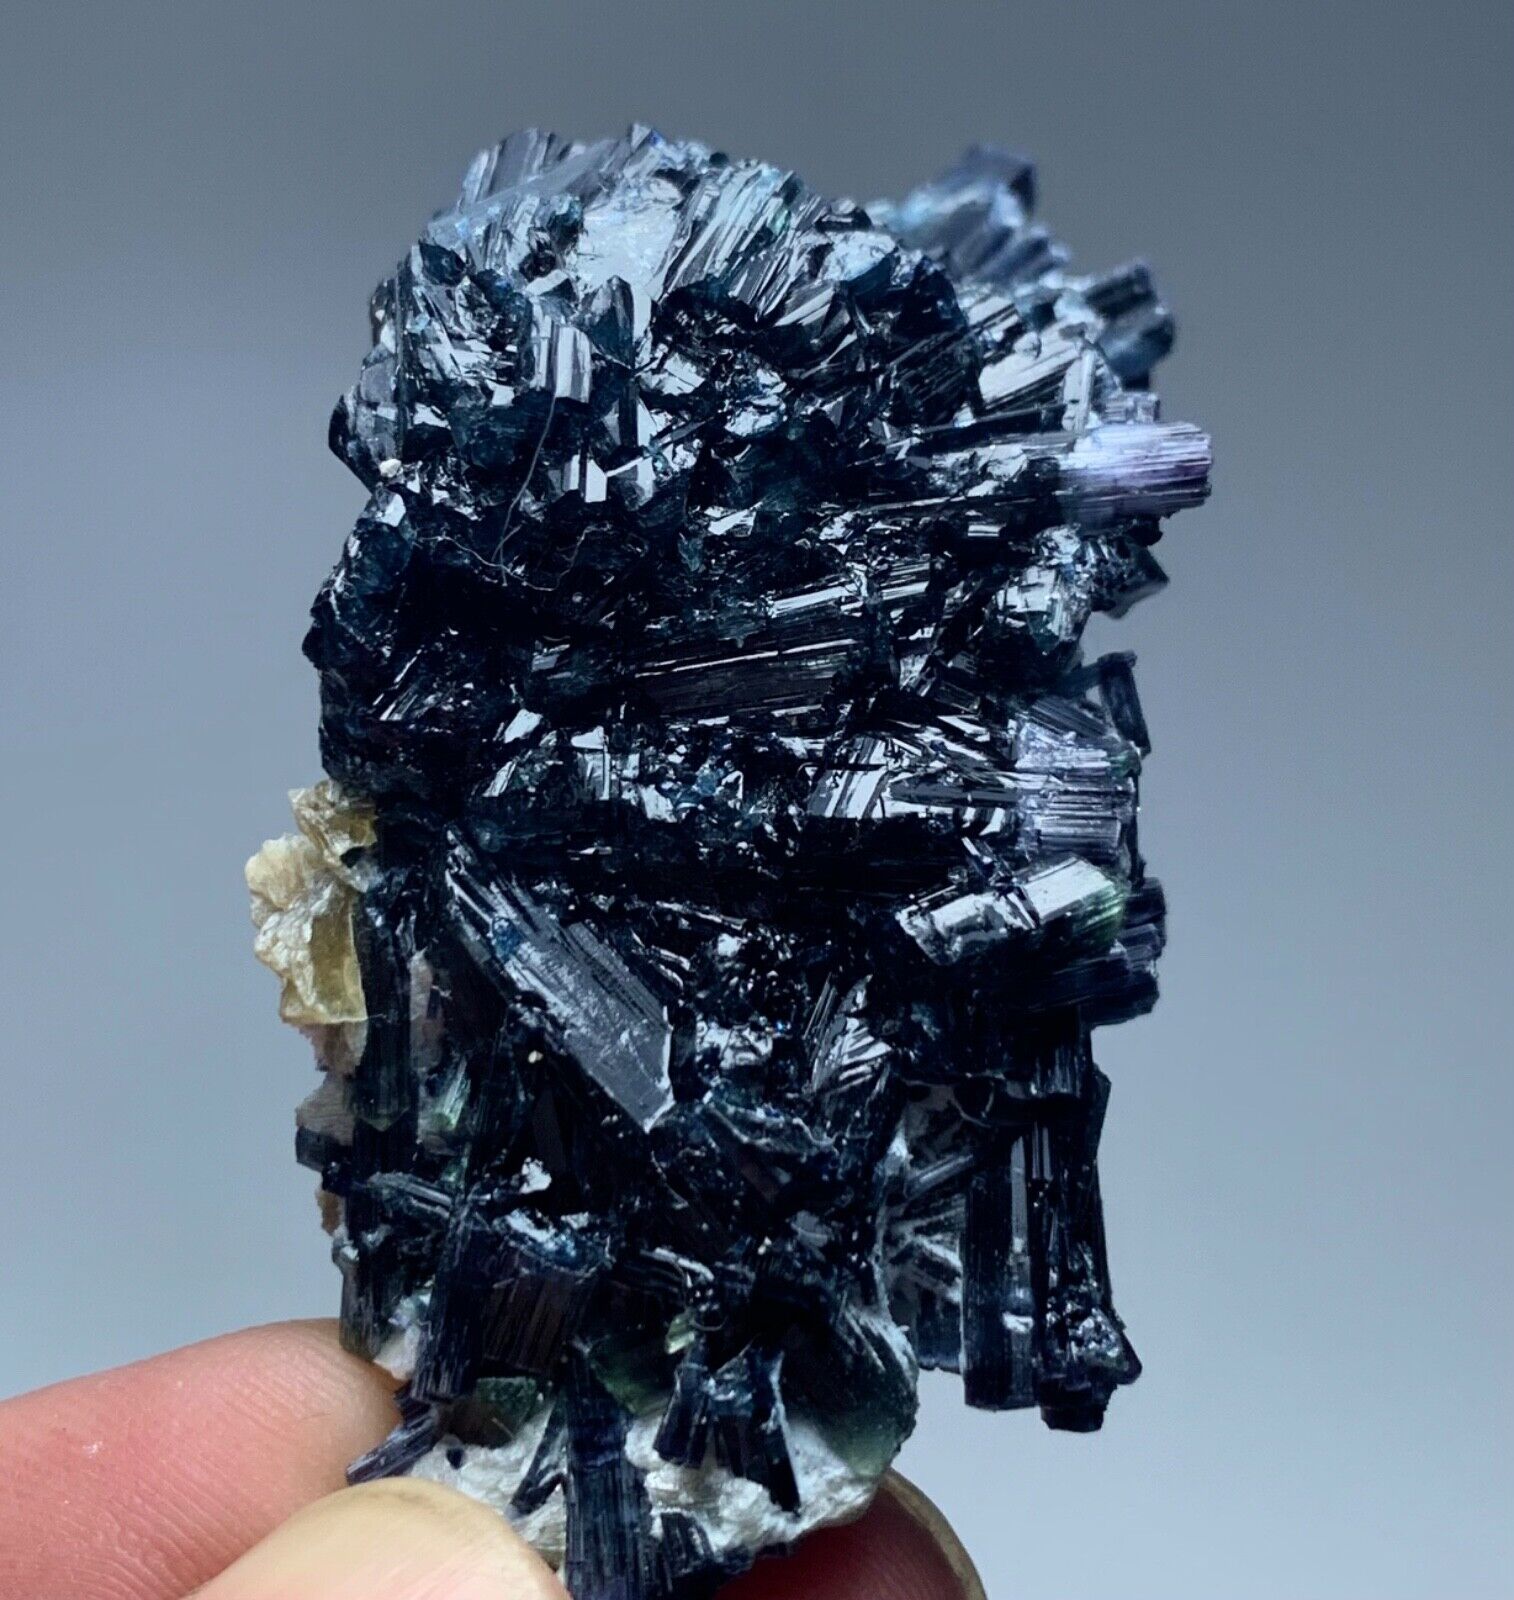 188 Cts Dark Blue-Black Tourmaline Crystal Cluster with Mica from Afghanistan.z